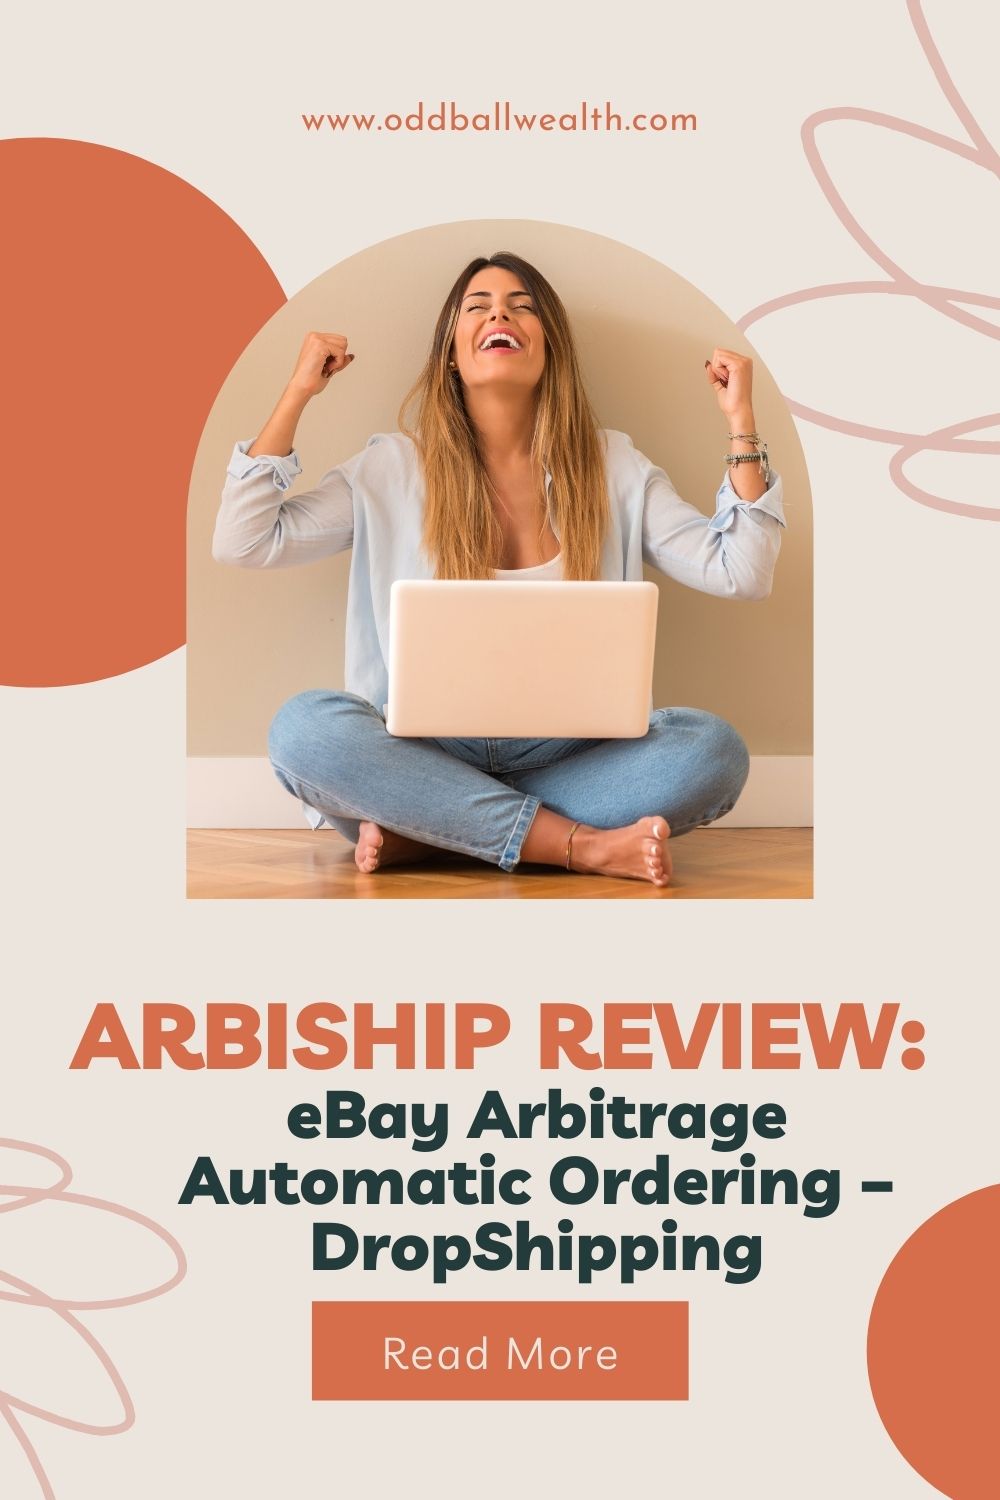 Arbiship Review: eBay Arbitrage Automatic Ordering - DropShipping